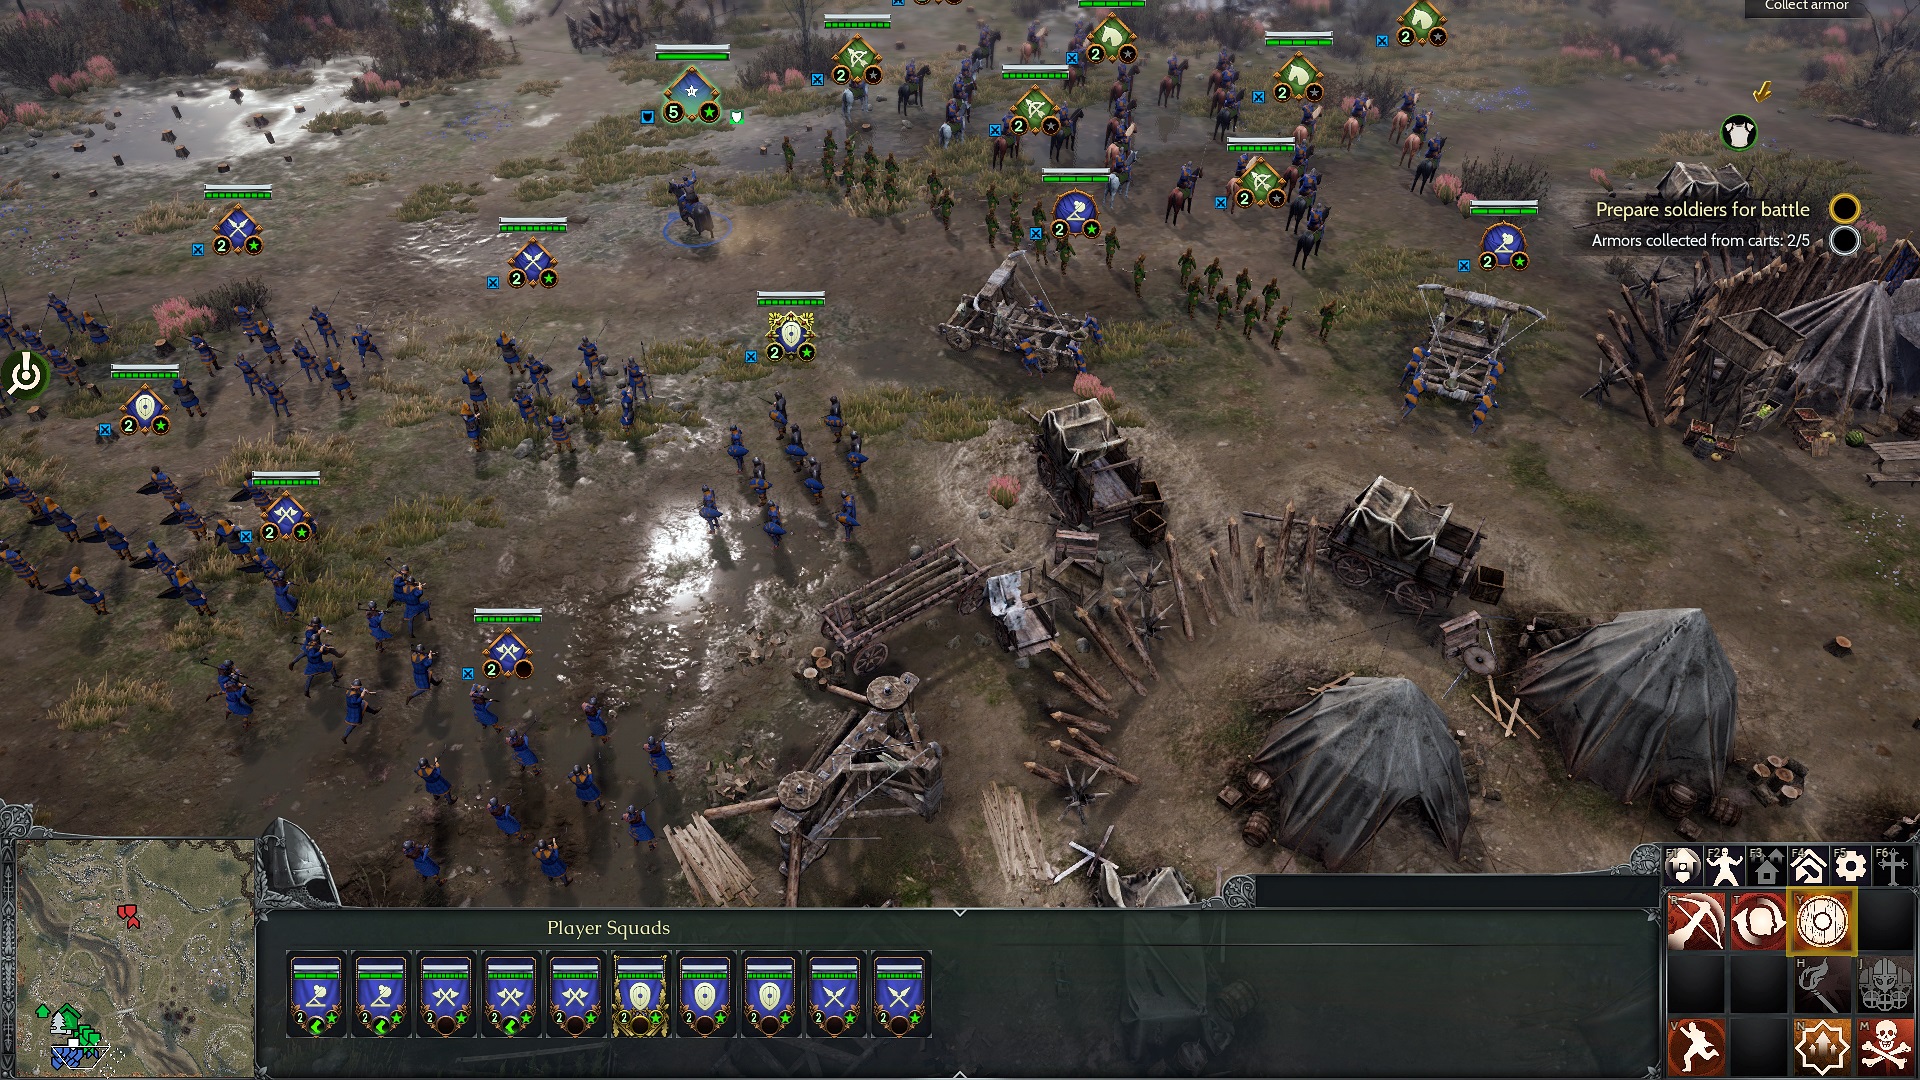 Historical RTS Ancestors Legacy Set for May 22 Release on PC and Xbox One